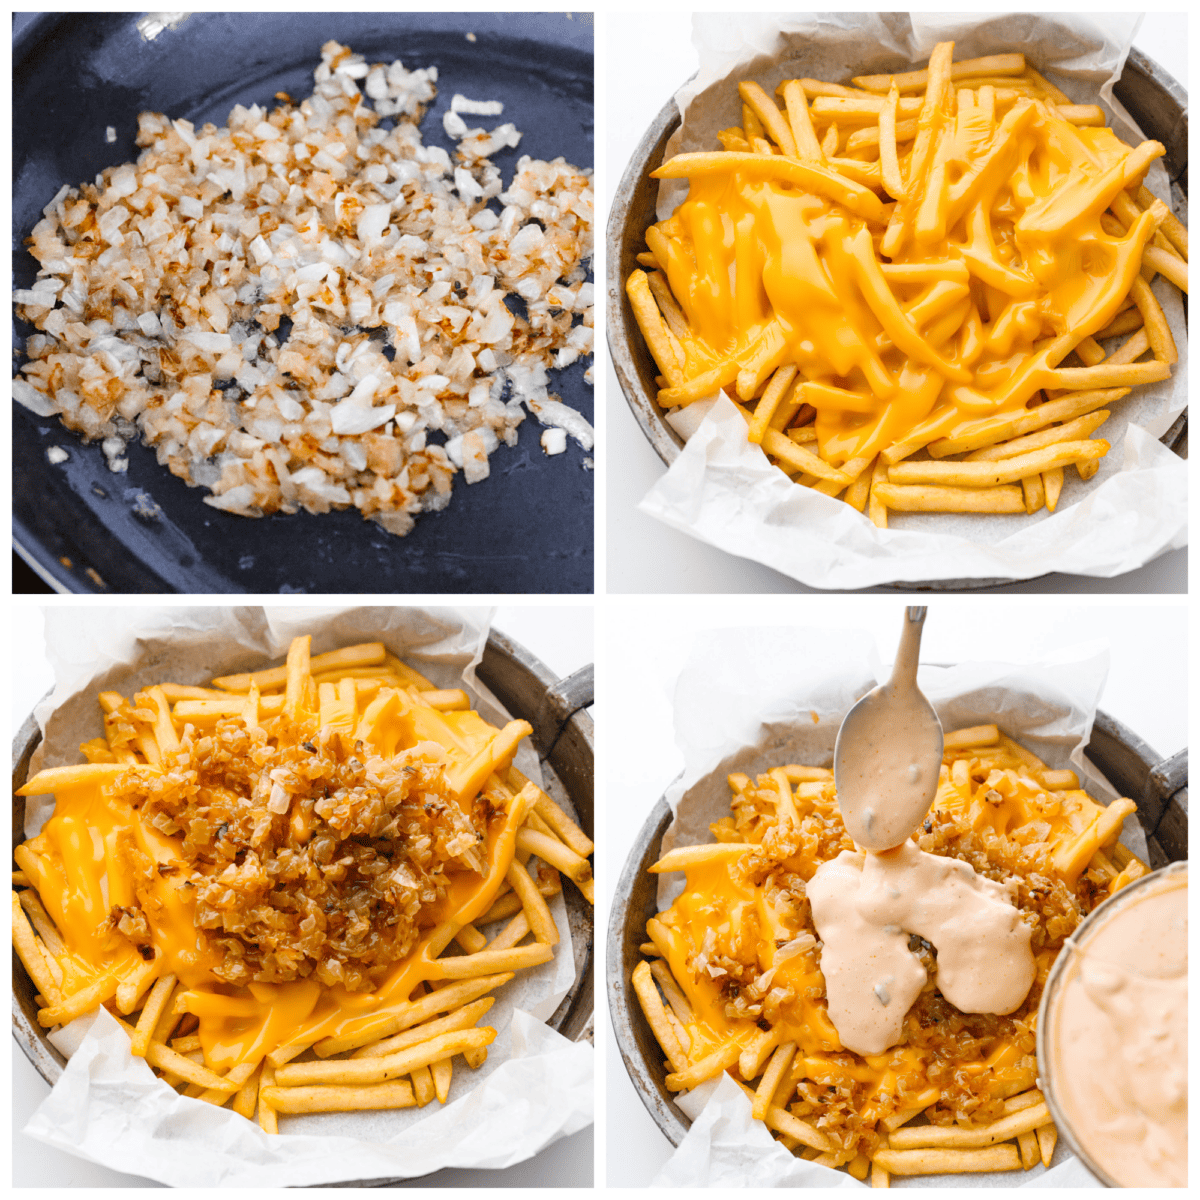 4-photo collage of the onions being caramelized and the toppings being added to the fries.